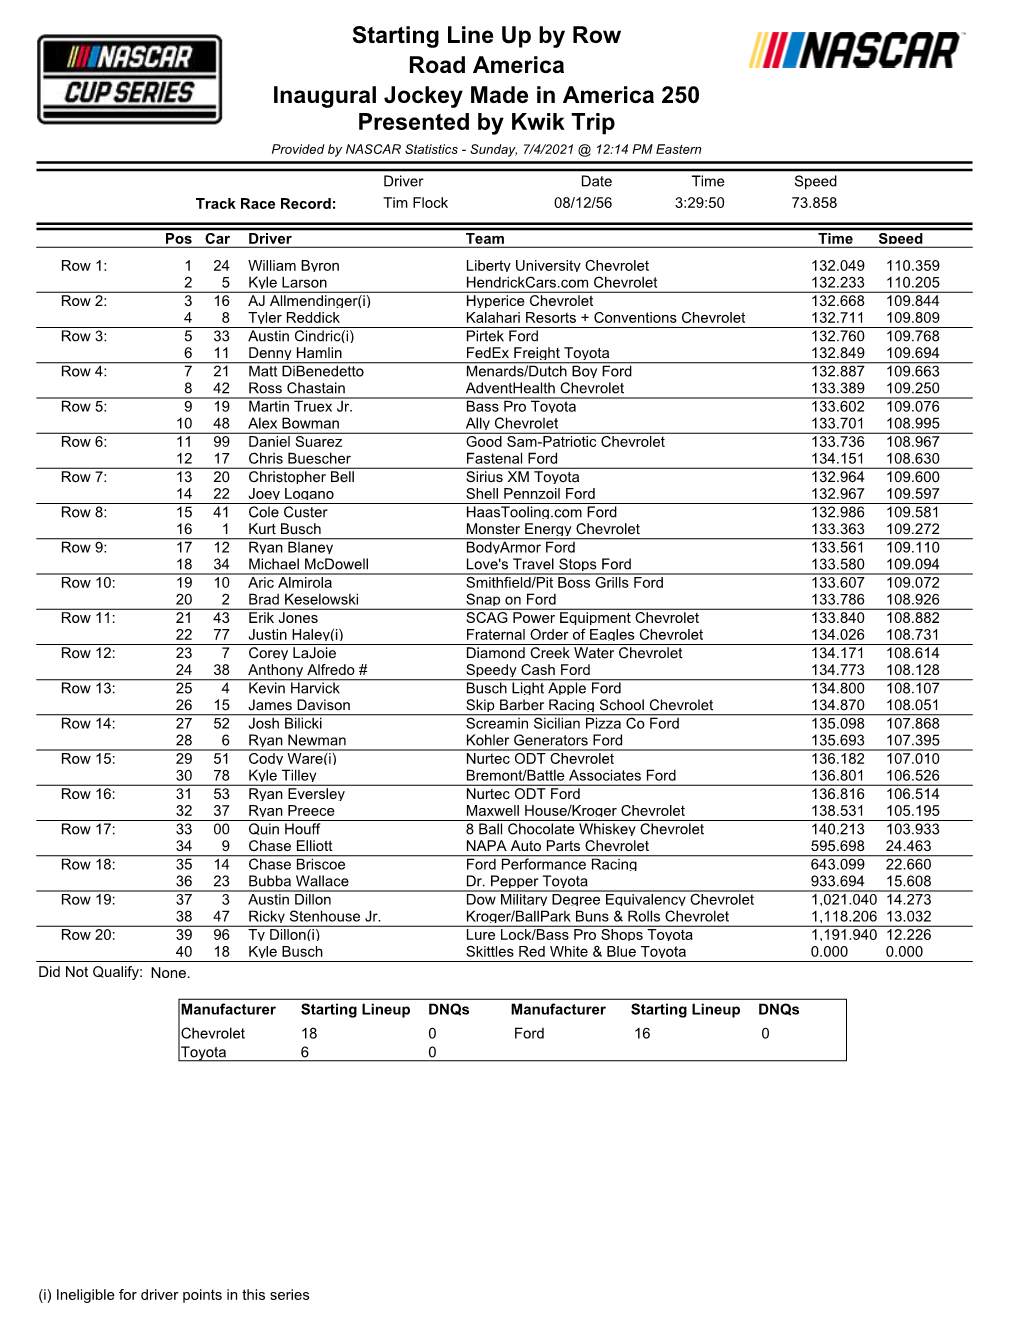 Starting Line up by Row Road America Inaugural Jockey Made in America 250 Presented by Kwik Trip Provided by NASCAR Statistics - Sunday, 7/4/2021 @ 12:14 PM Eastern